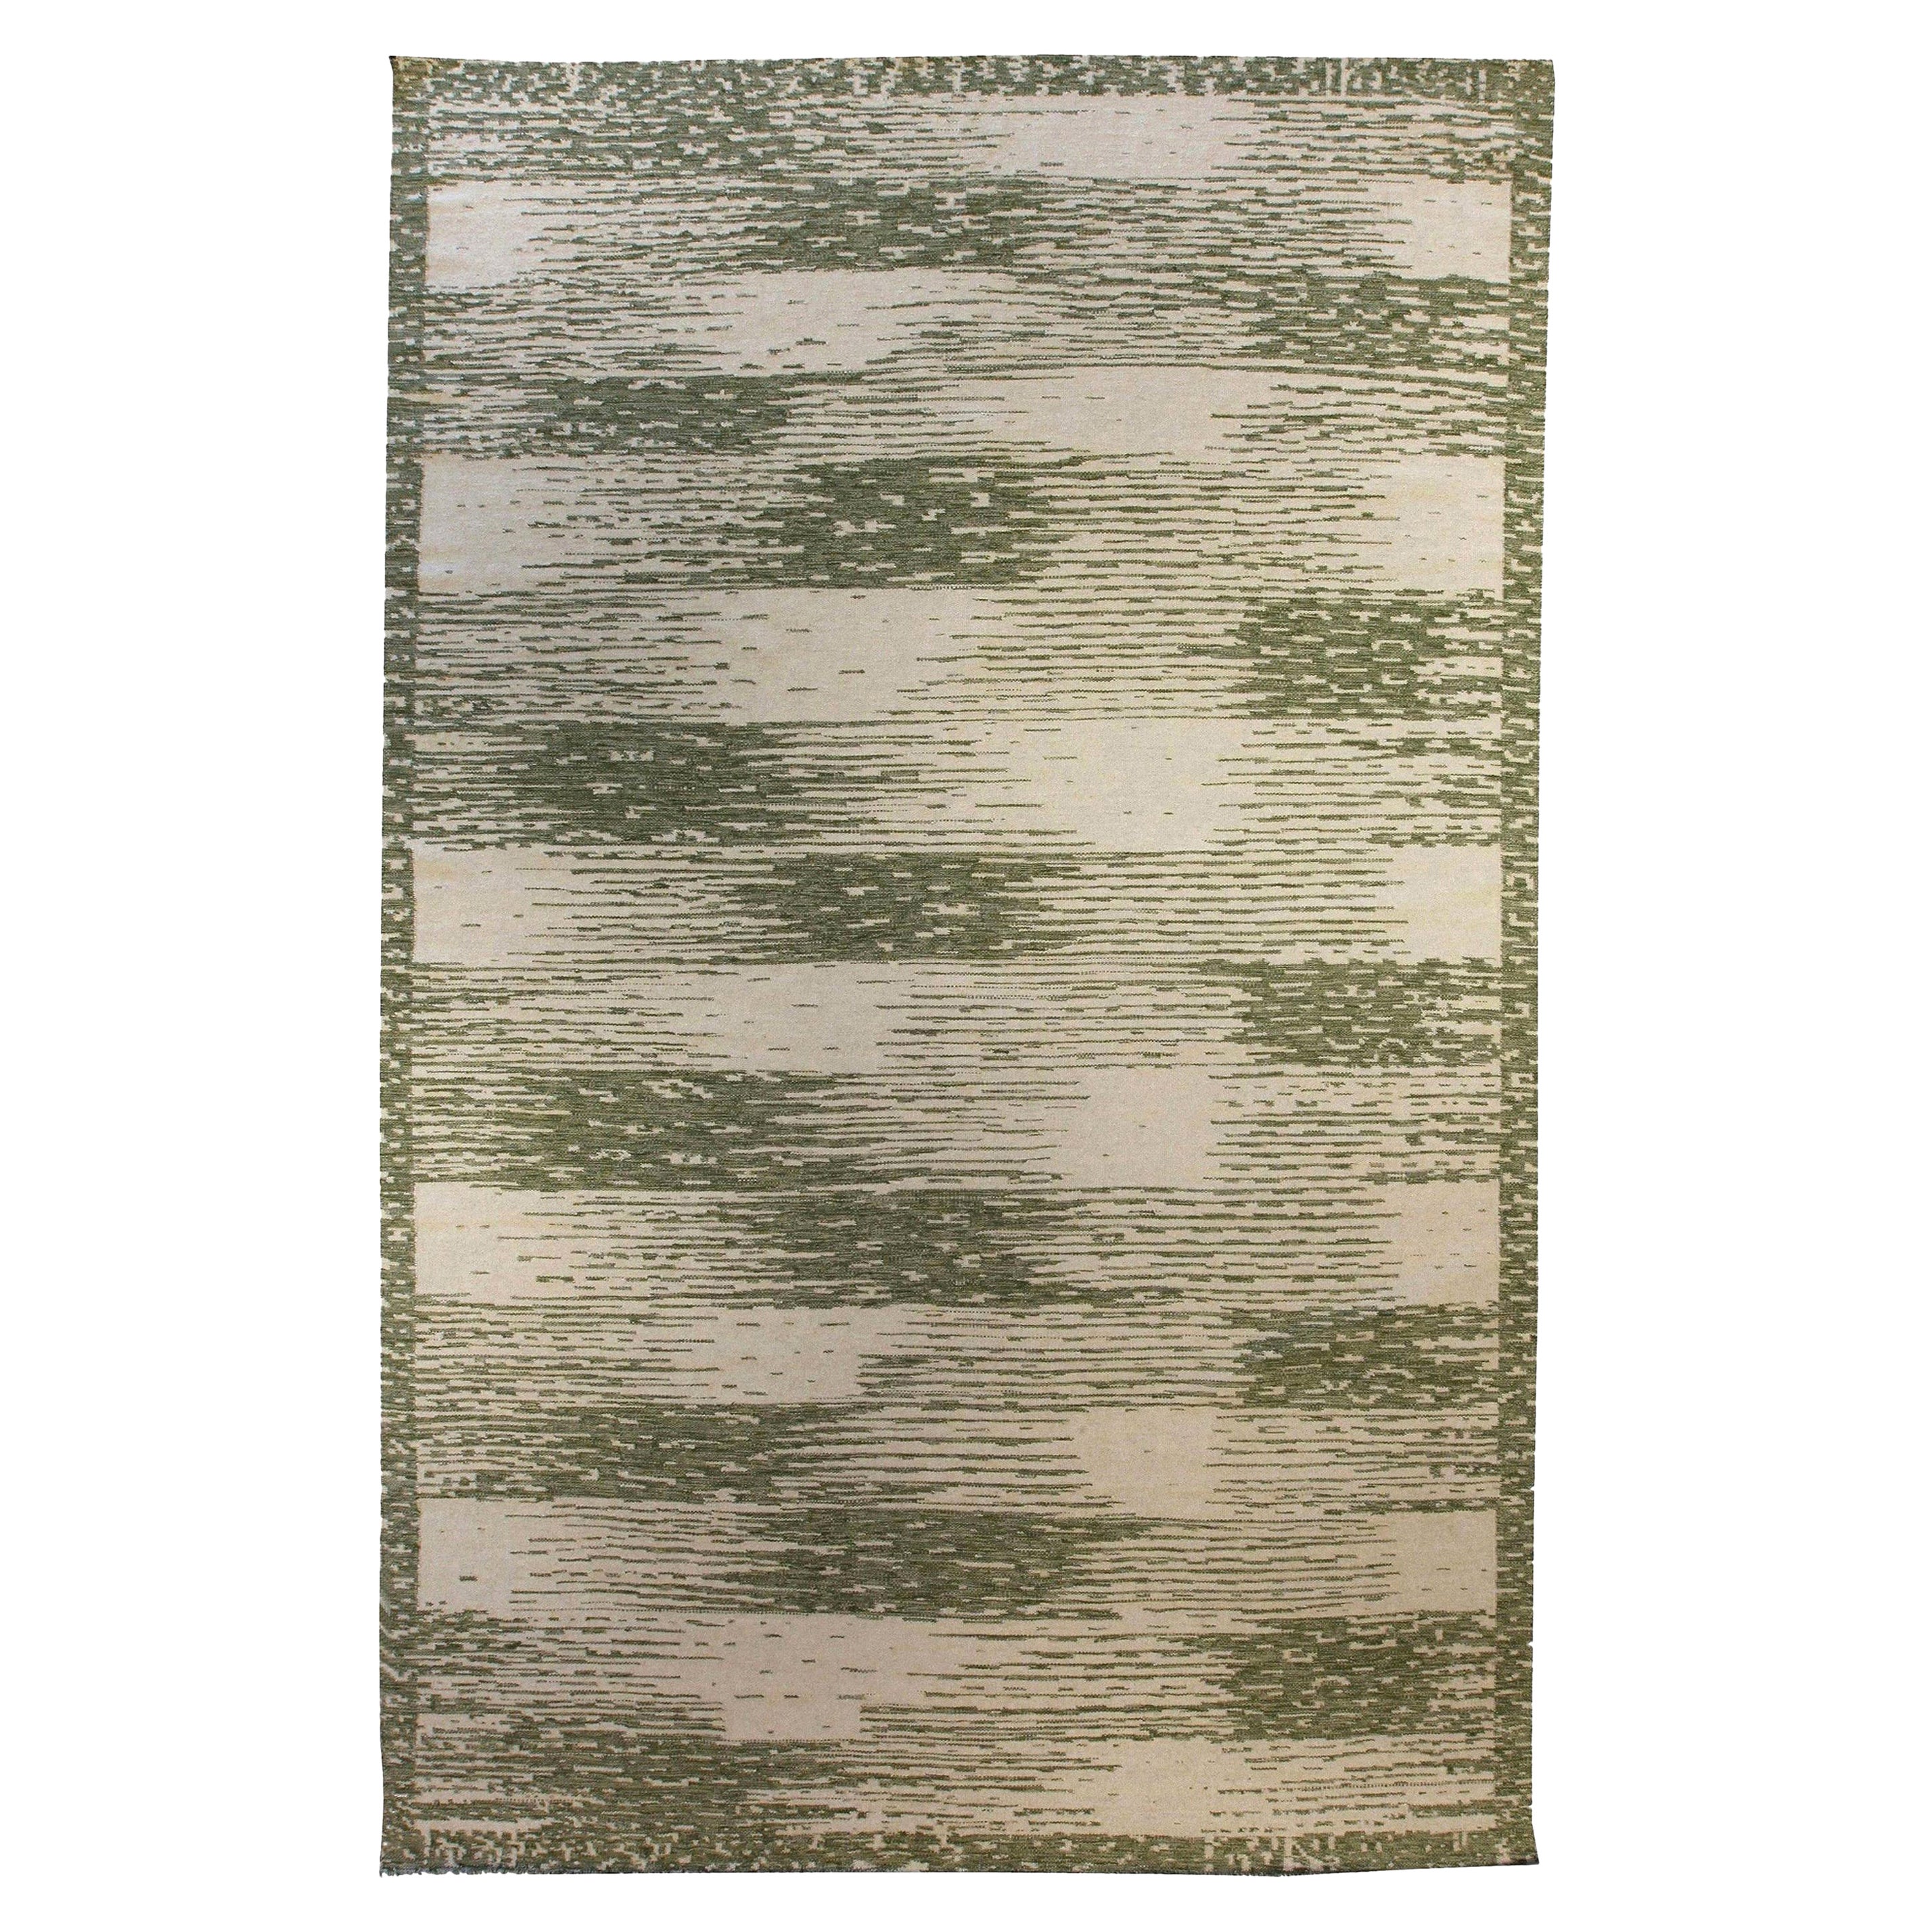 Contemporary Forel Green and Beige Handmade Wool Rug by Doris Leslie Blau For Sale